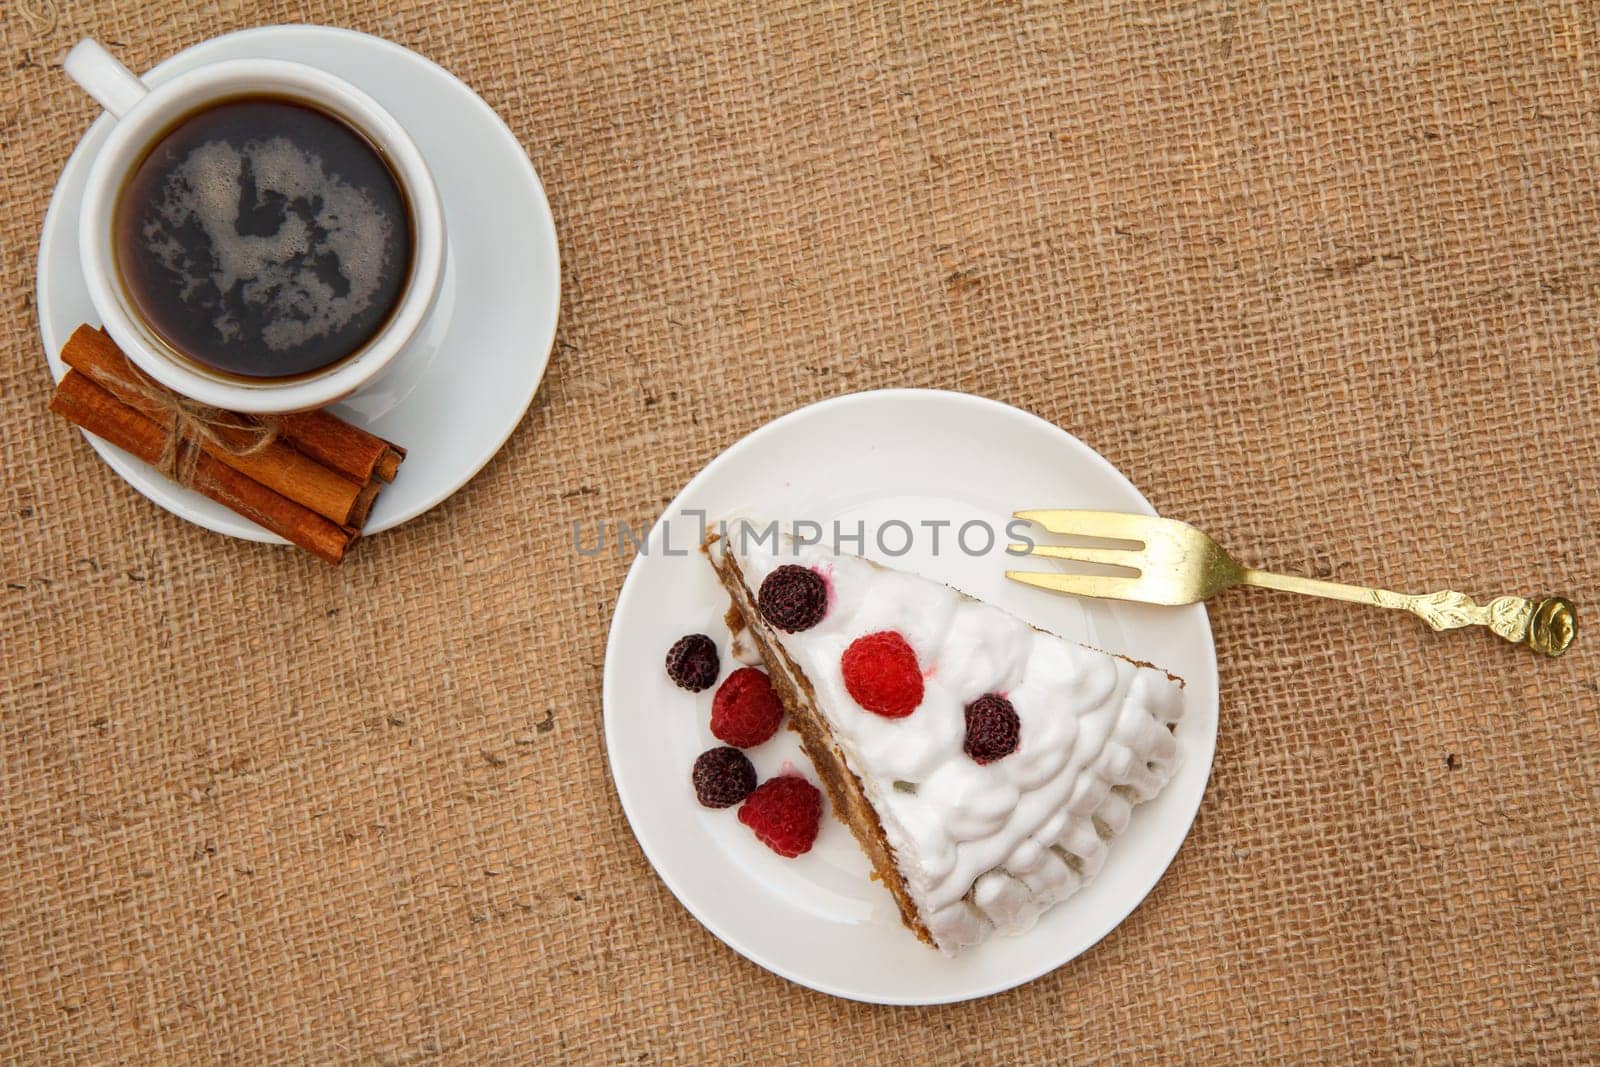 Cup of coffee, cinnamon, fork and slice of biscuit cake decorated with whipped cream and raspberries on table with sackcloth. Top view.